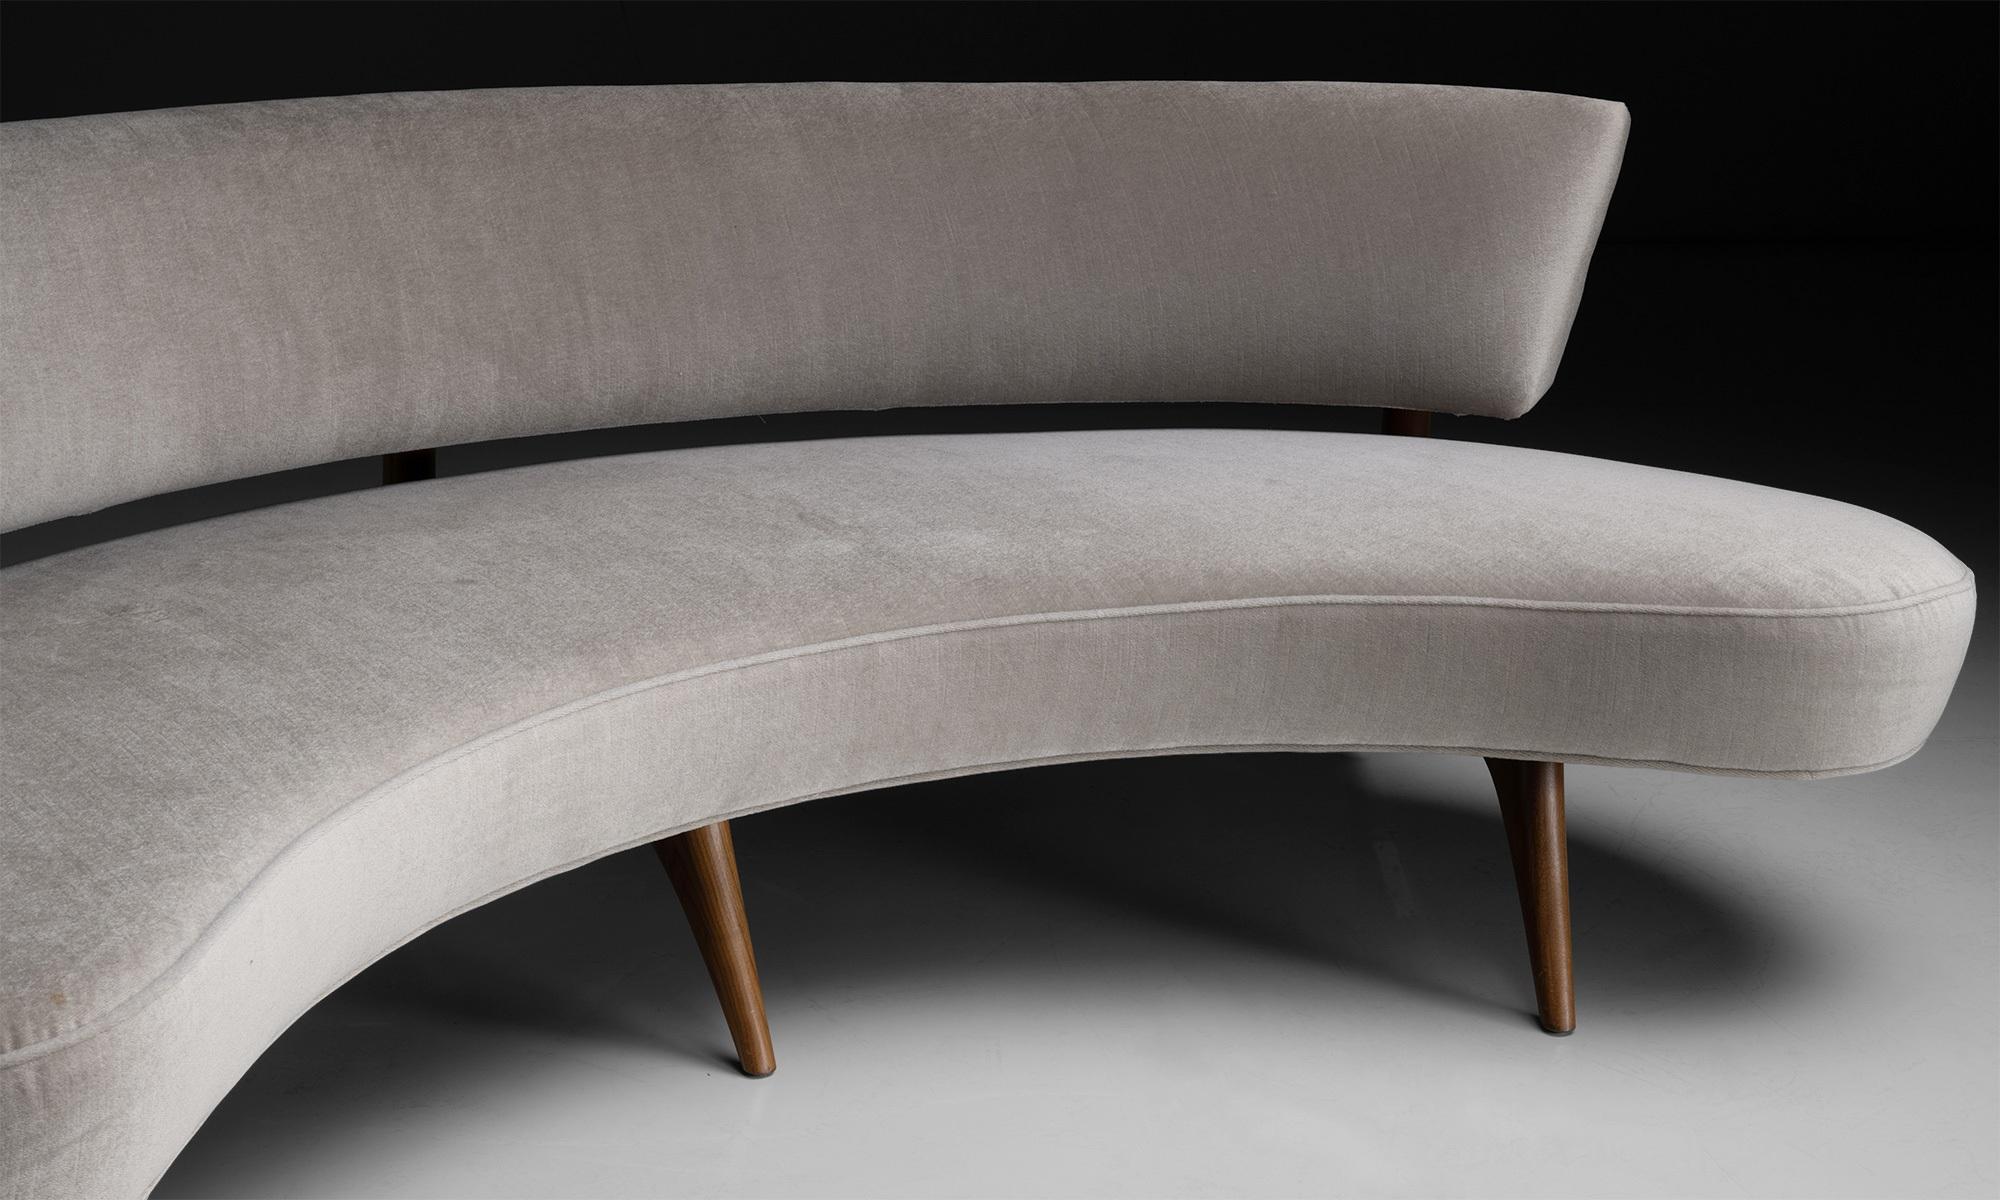 Contemporary Floating Curved Sofa by Vladimir Kagan, America, 2018